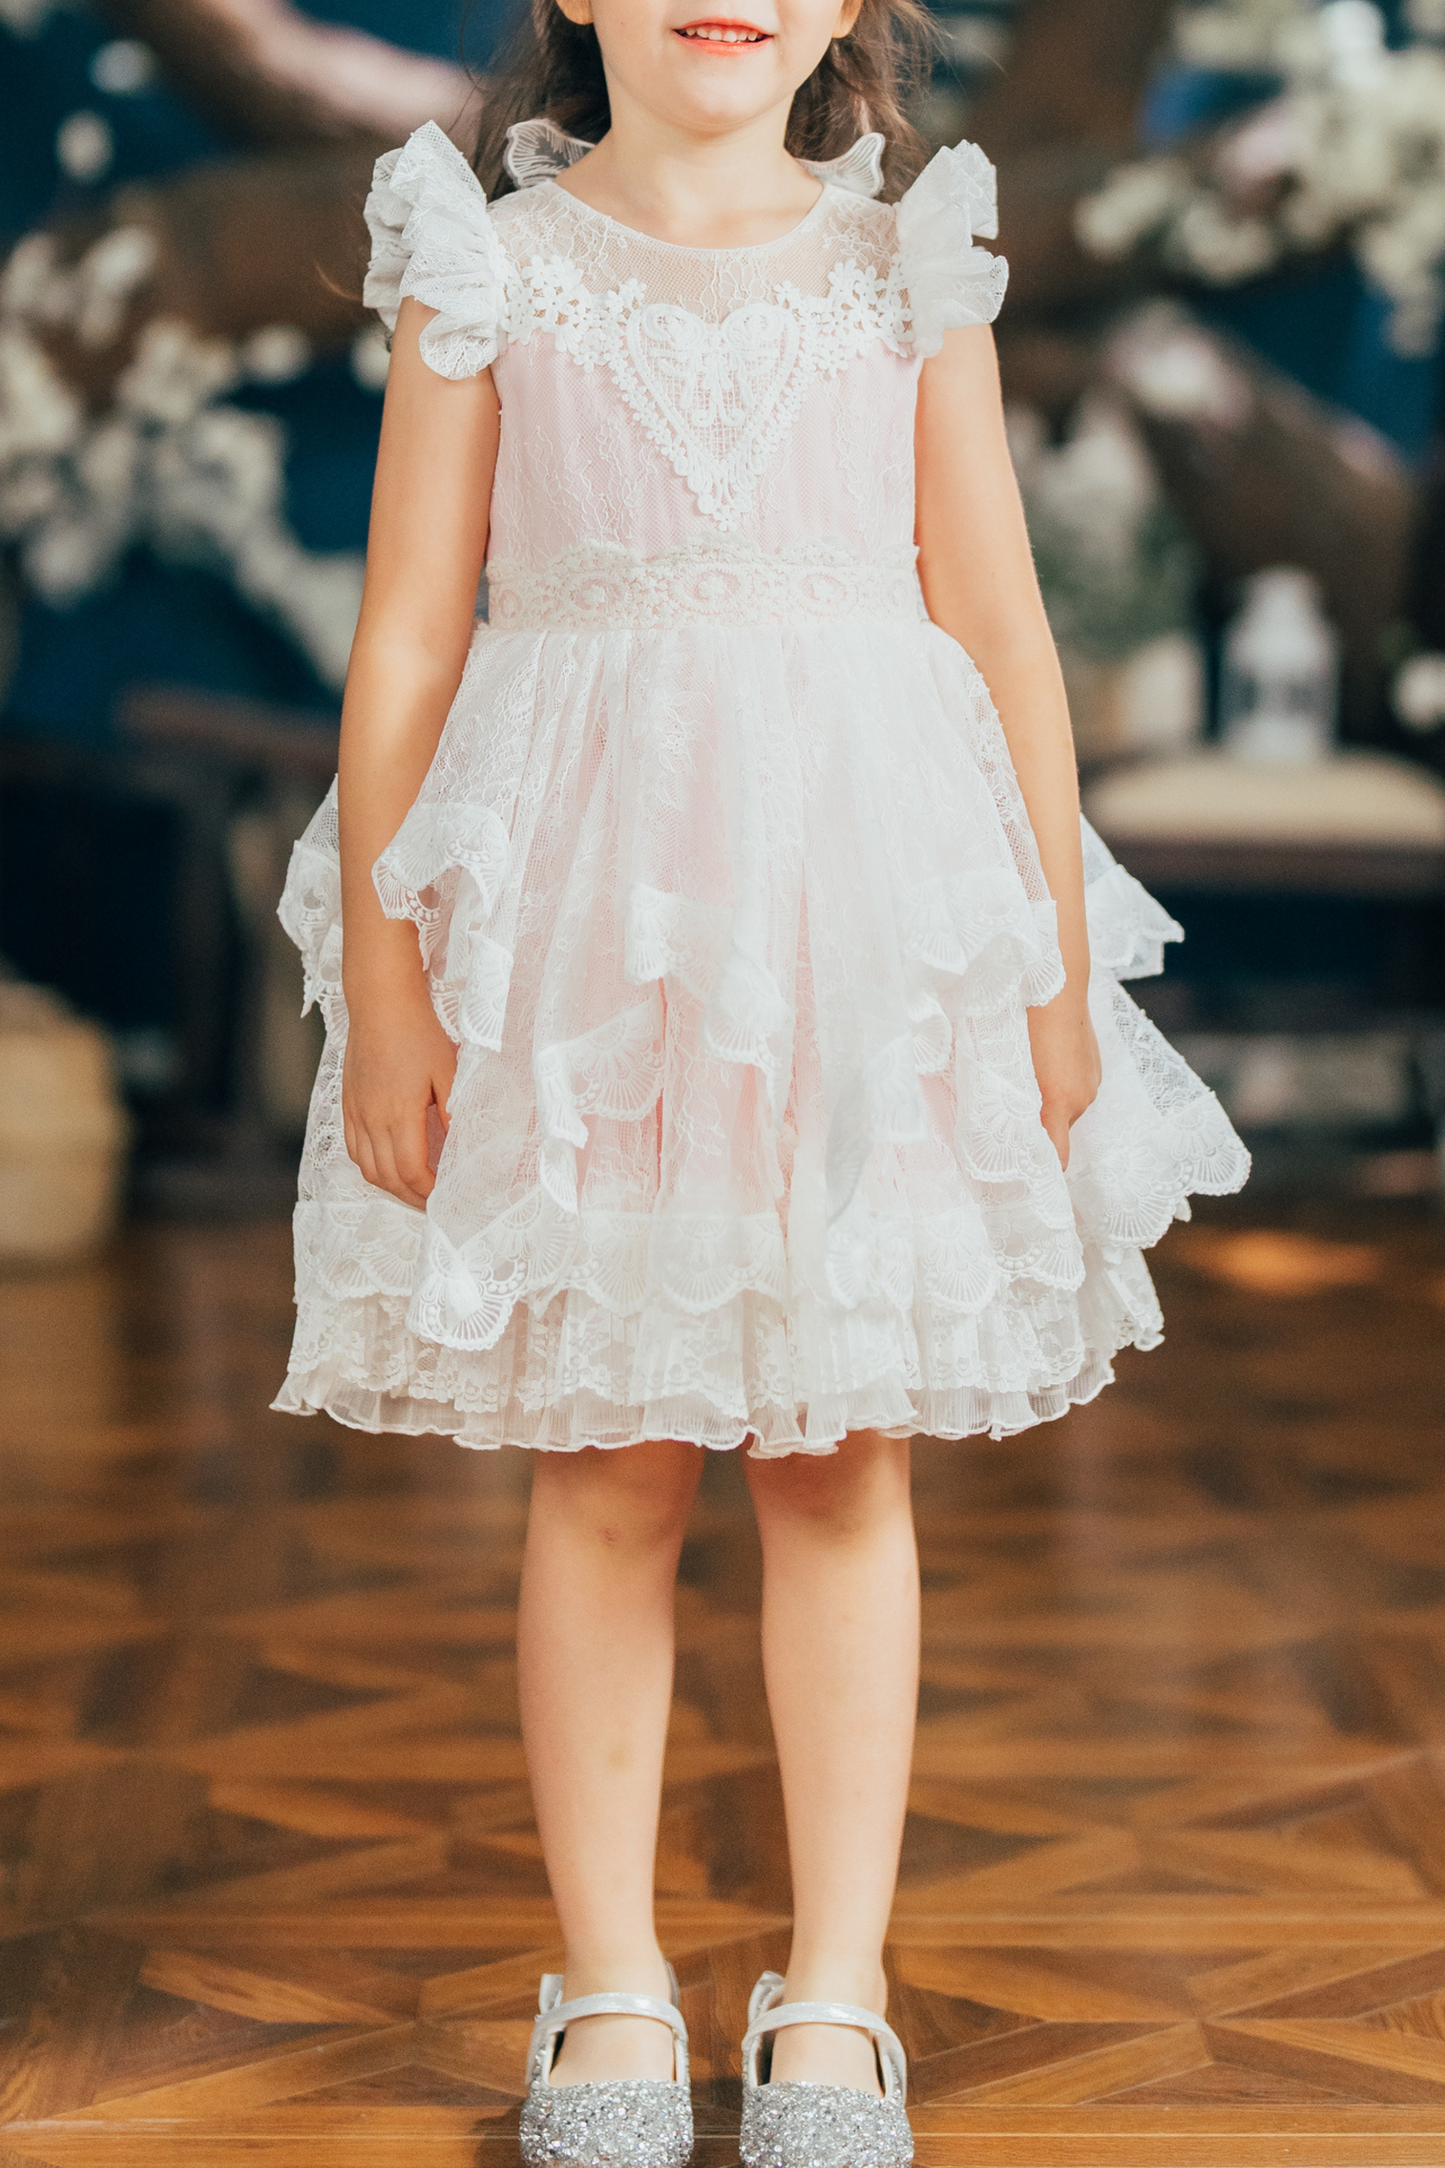 Winged Cupid Angel Lace Dress (White)